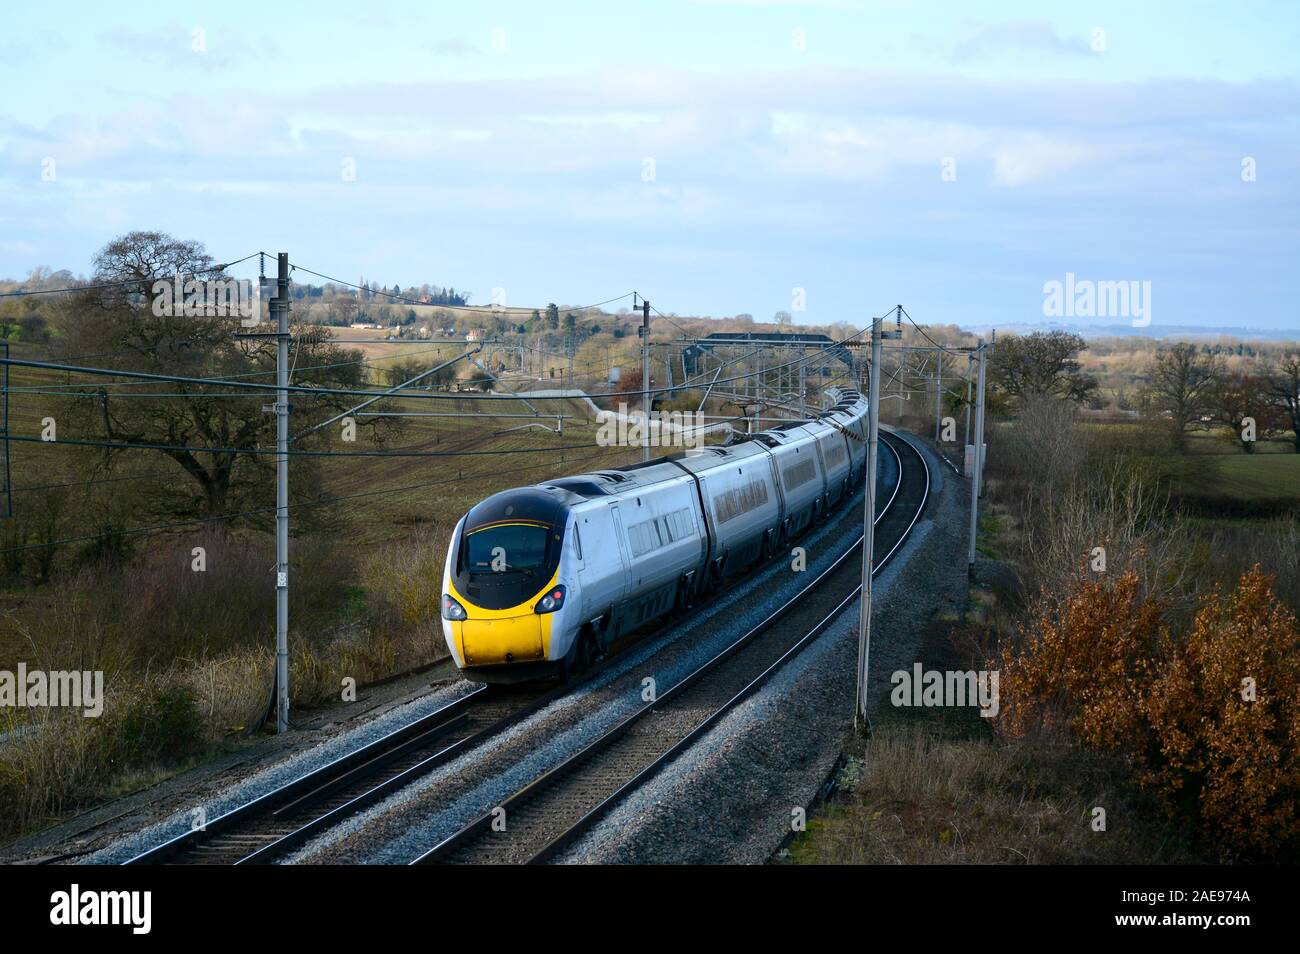 An unliveried Virgin Trains Class 390 Pendolino powers up the West Coast Main Line on the last day of the Virgin Trains Franchise, December 2019 Stock Photo